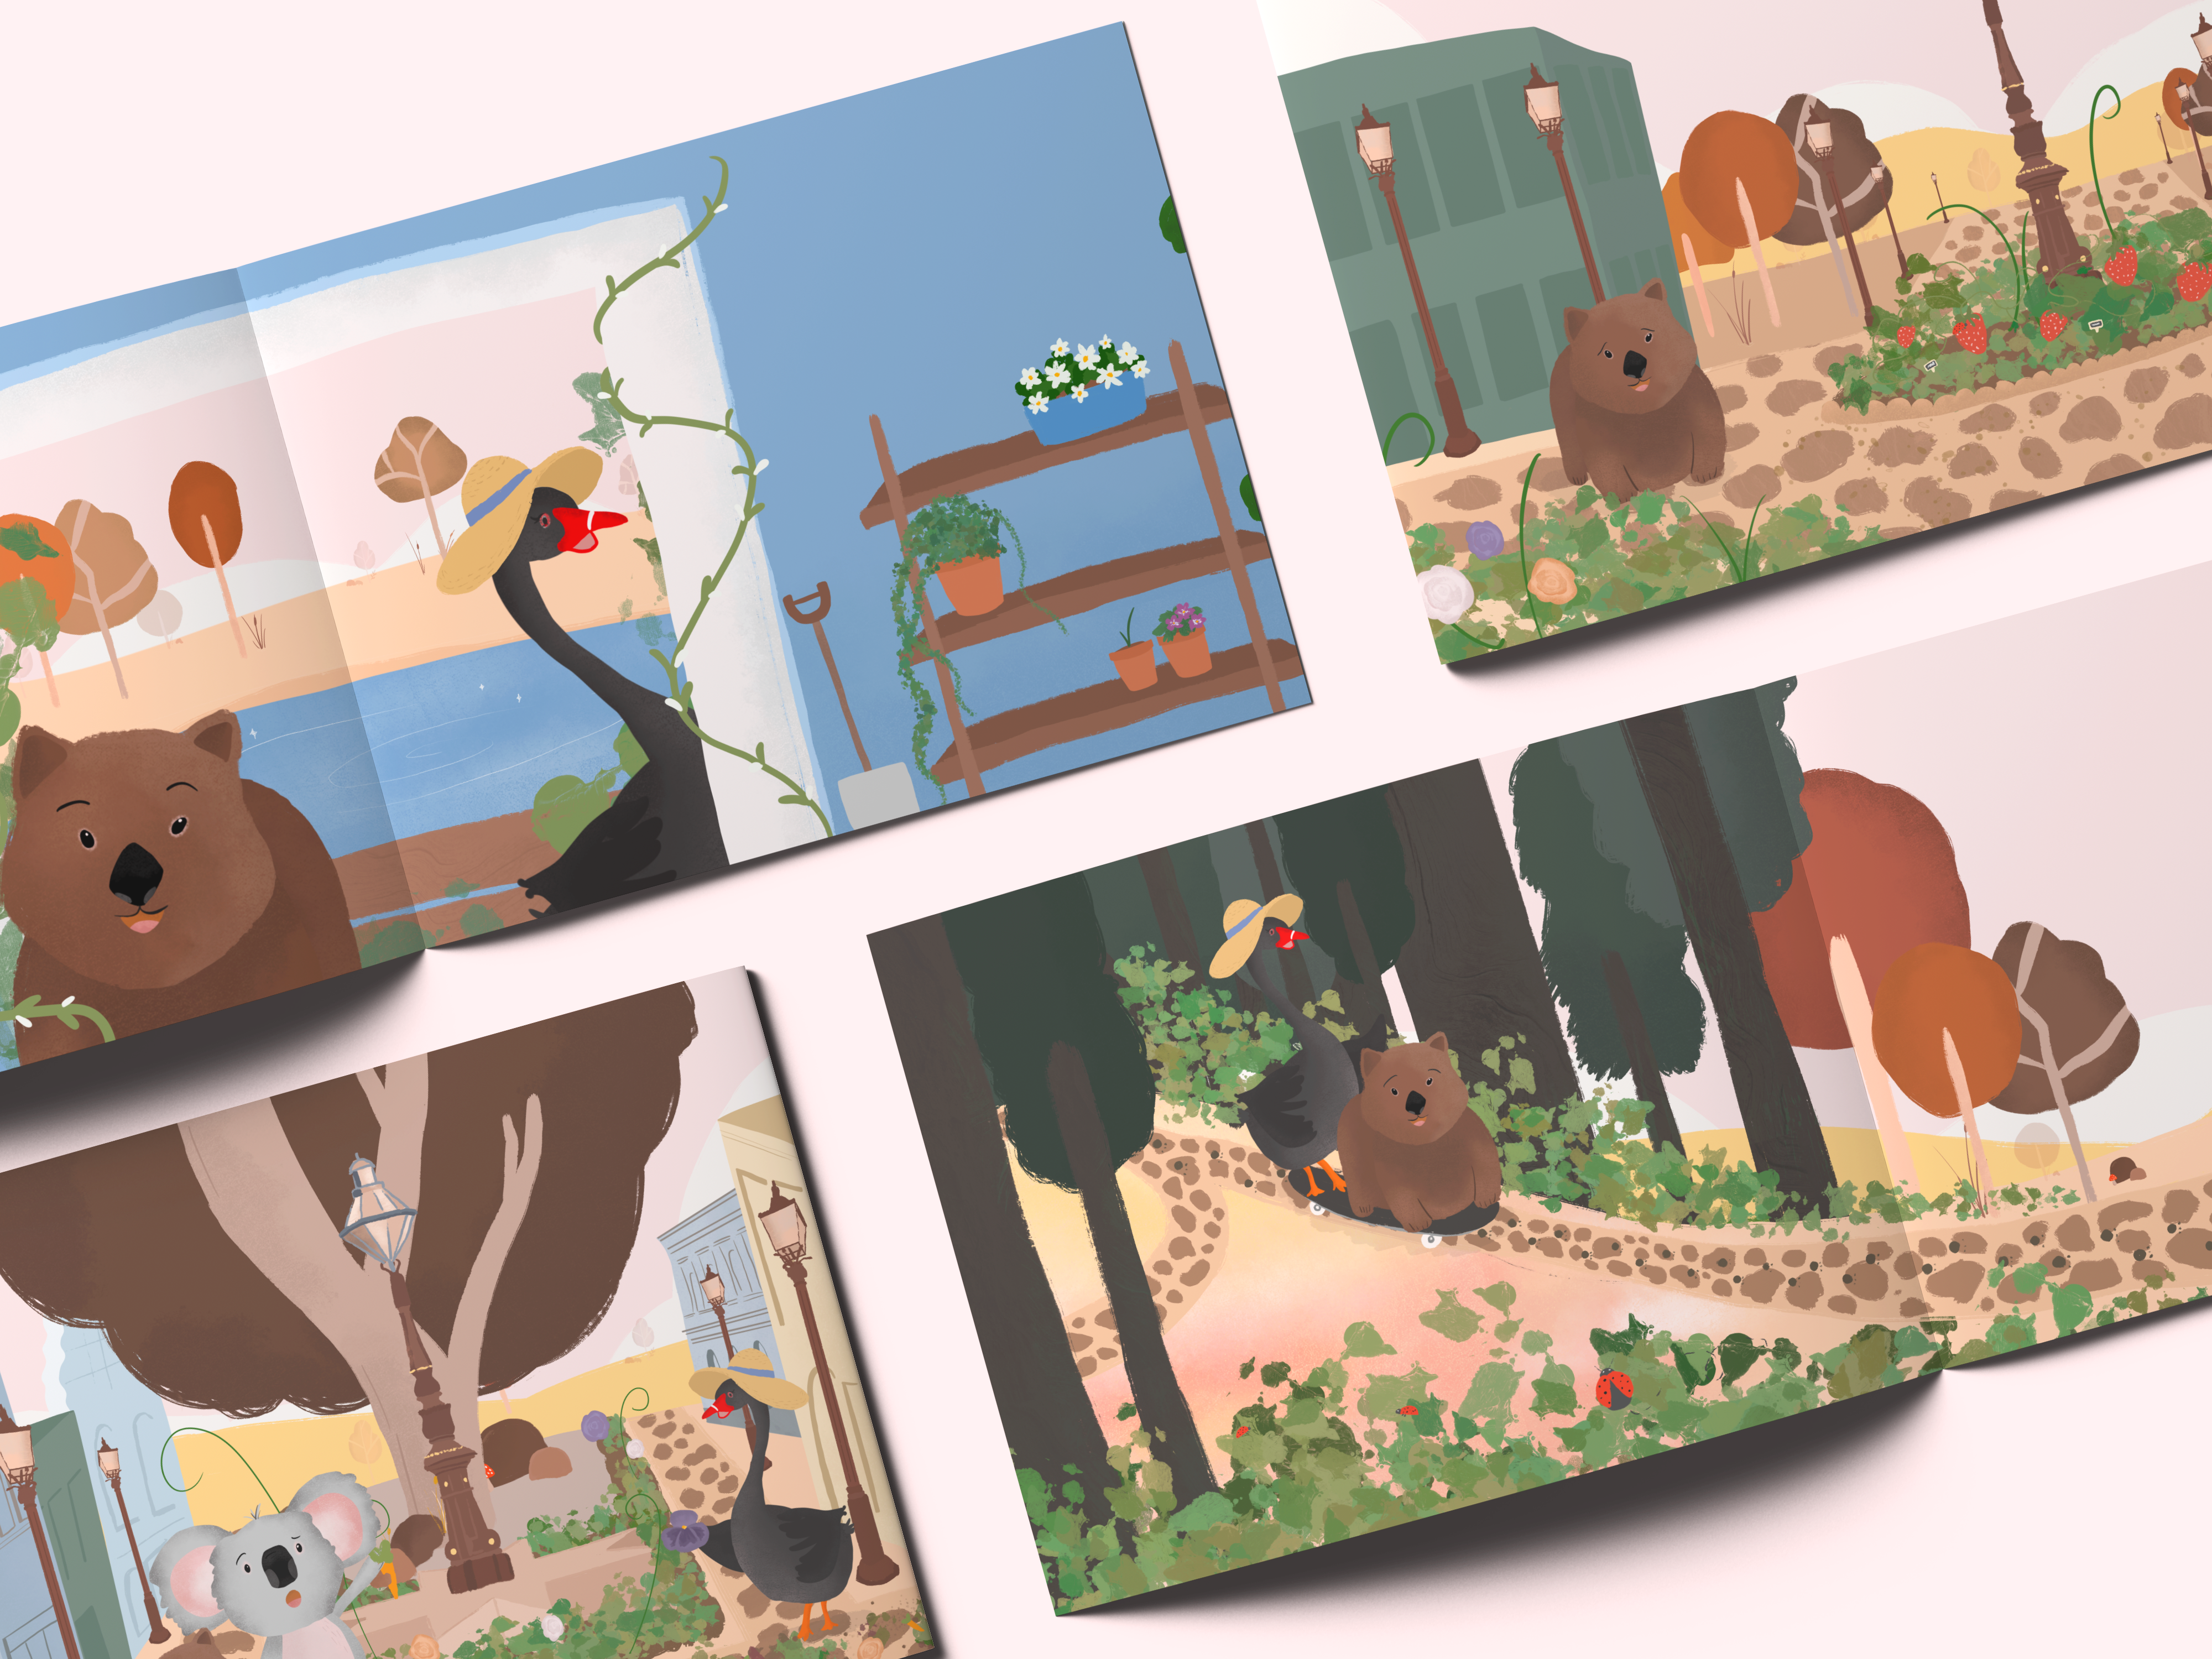 Four open book spreads from 'Spring in Ballarat' children's book, showcasing colorful illustrations of Miss Eccles, Herbert, and Lynnie on their exciting springtime adventure.